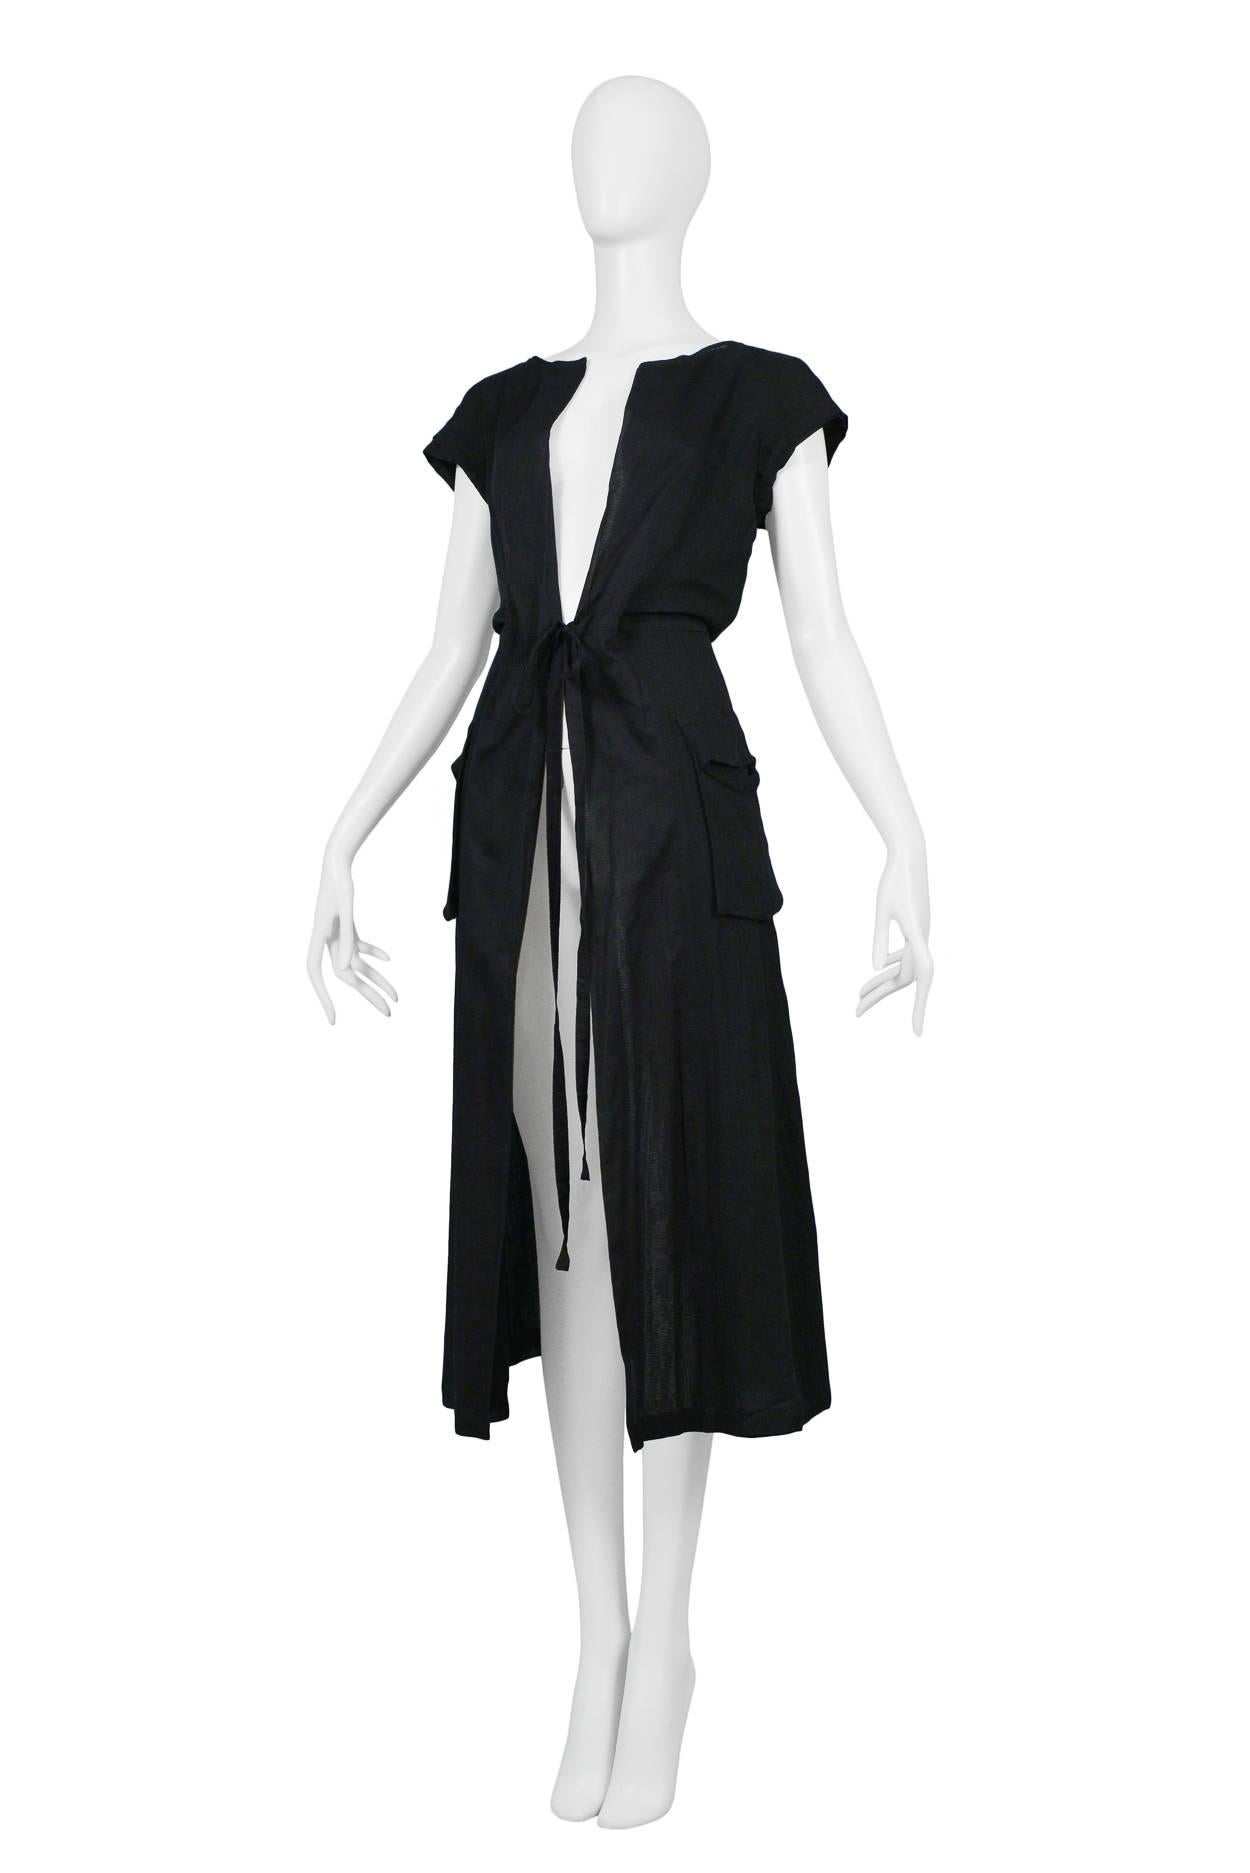 Resurrection Vintage is excited to offer a vintage Comme des Garcons black linen duster featuring front pockets, tie front, cap sleeves, and a-line skirt. 

Comme Des Garcons
Size: Small
Measurements: Bust 32